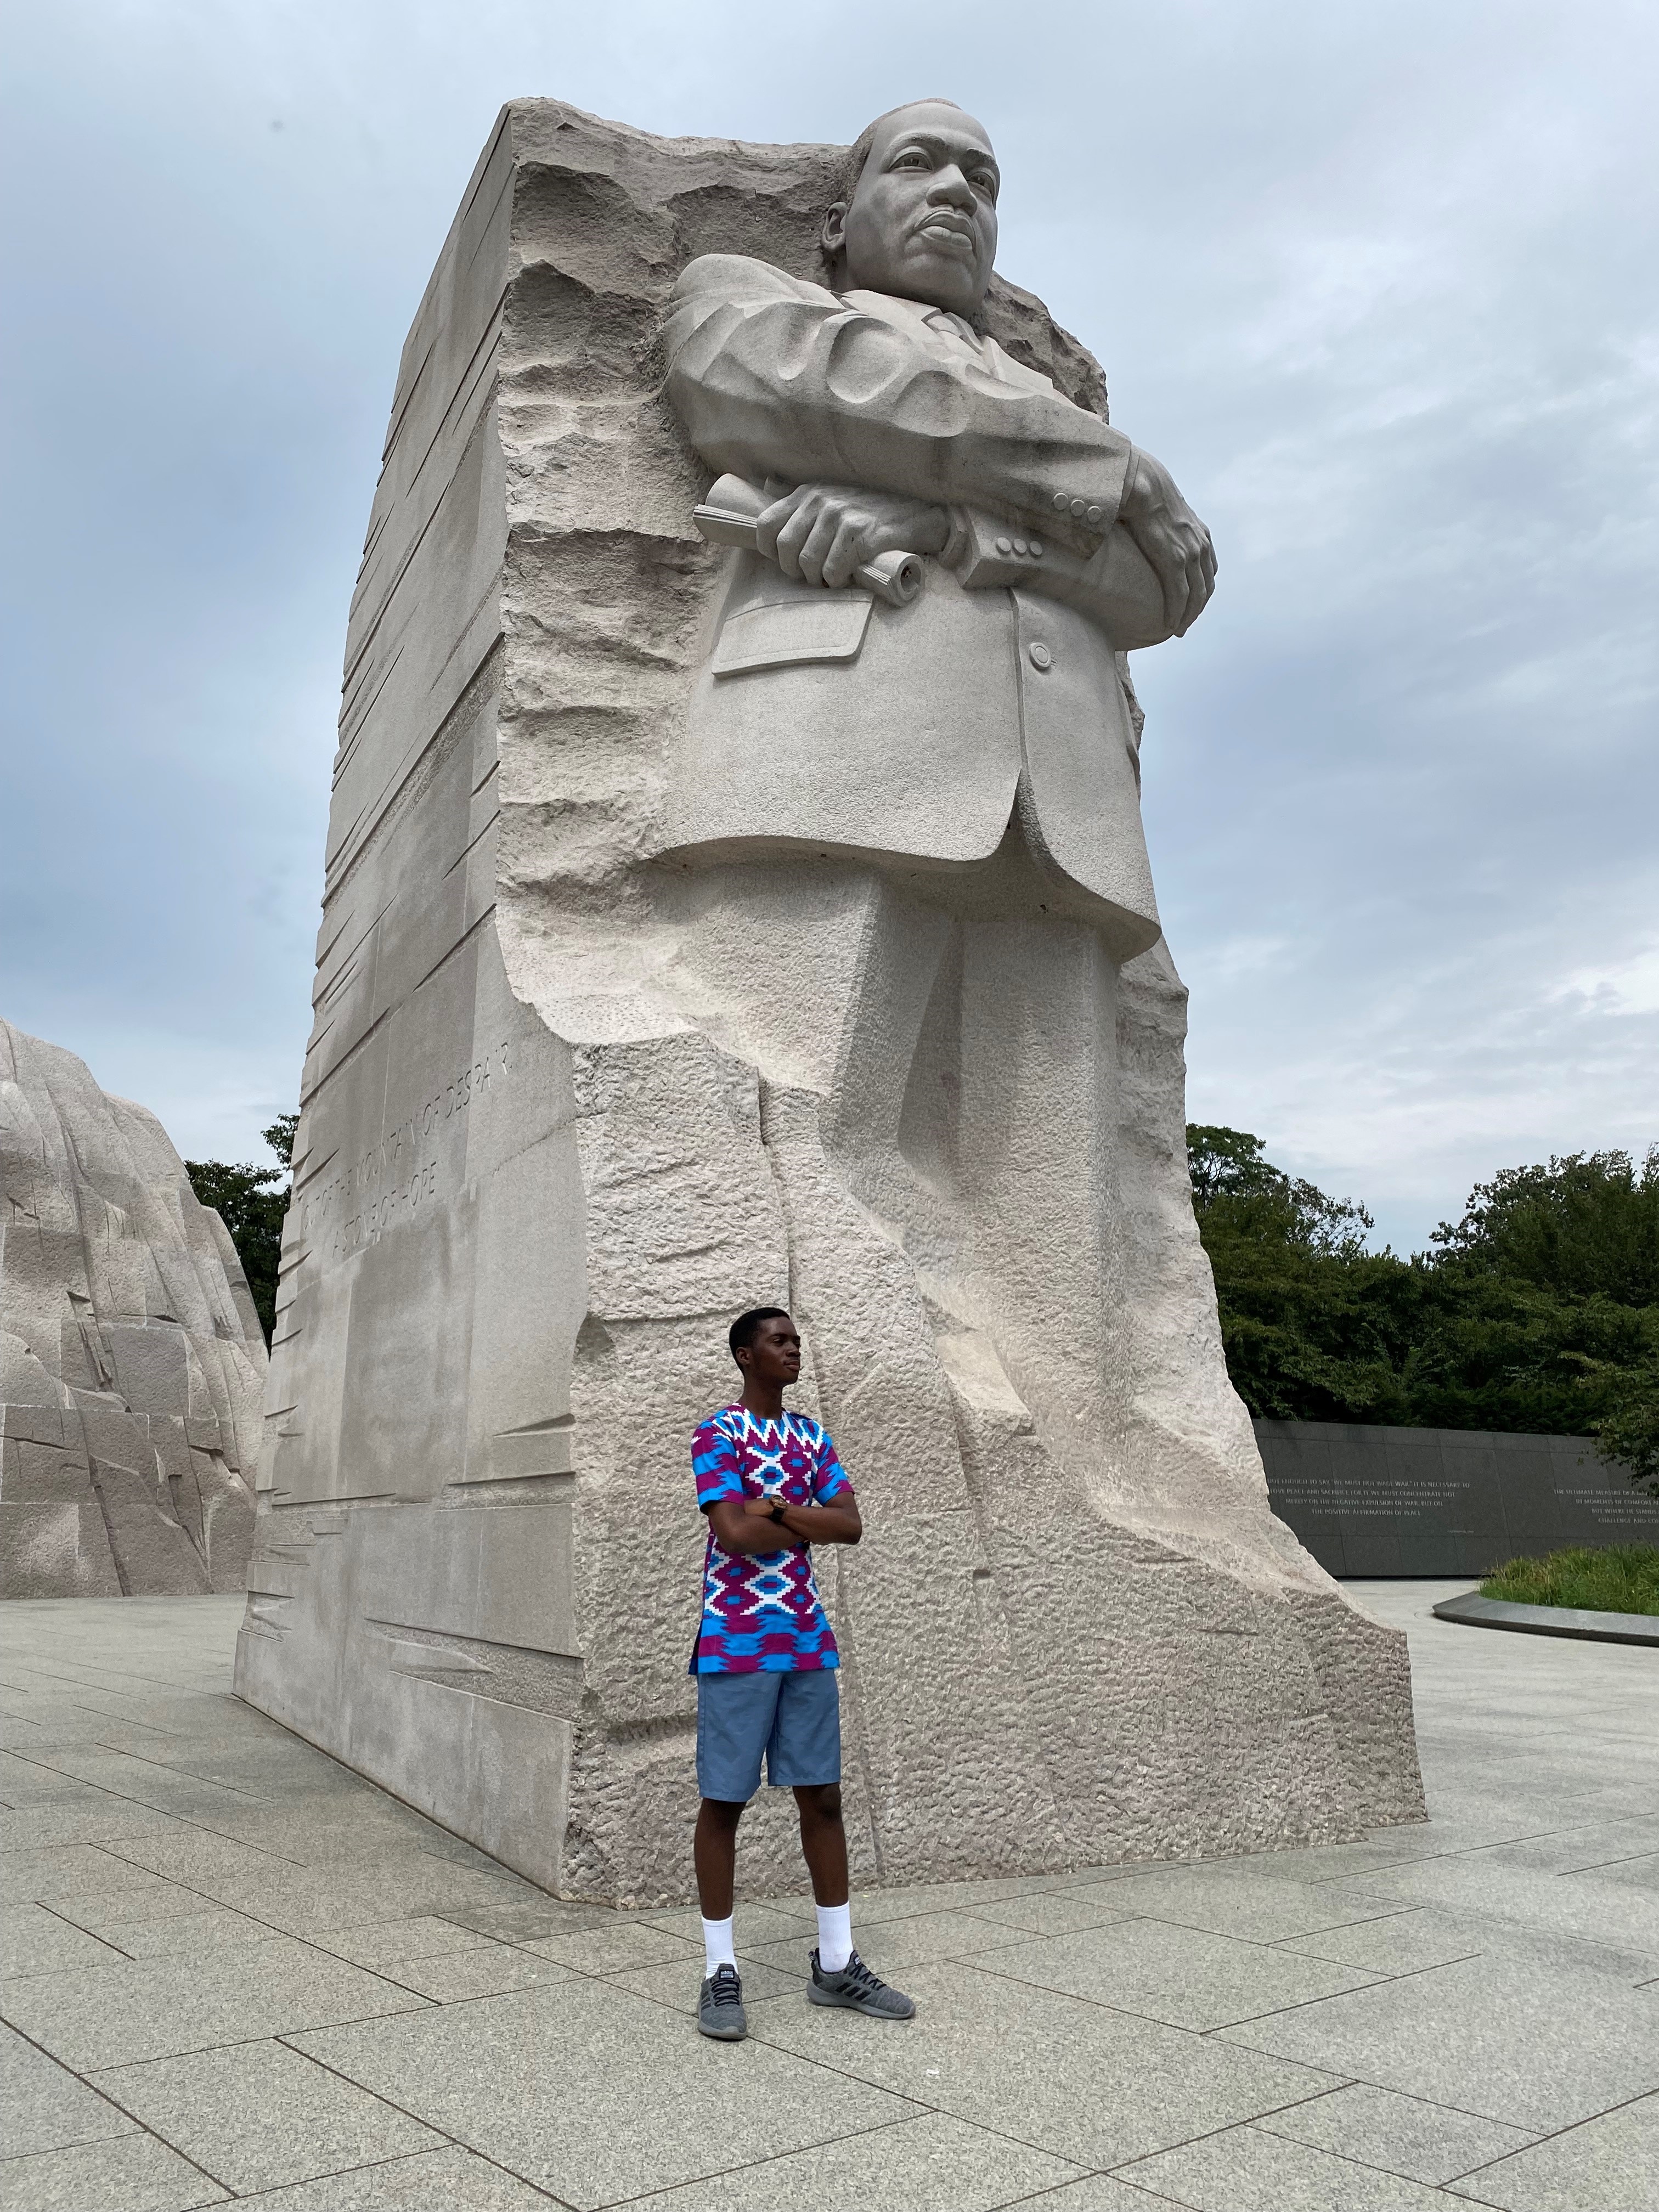 Omari standing in front of the Martin Luther King memorial